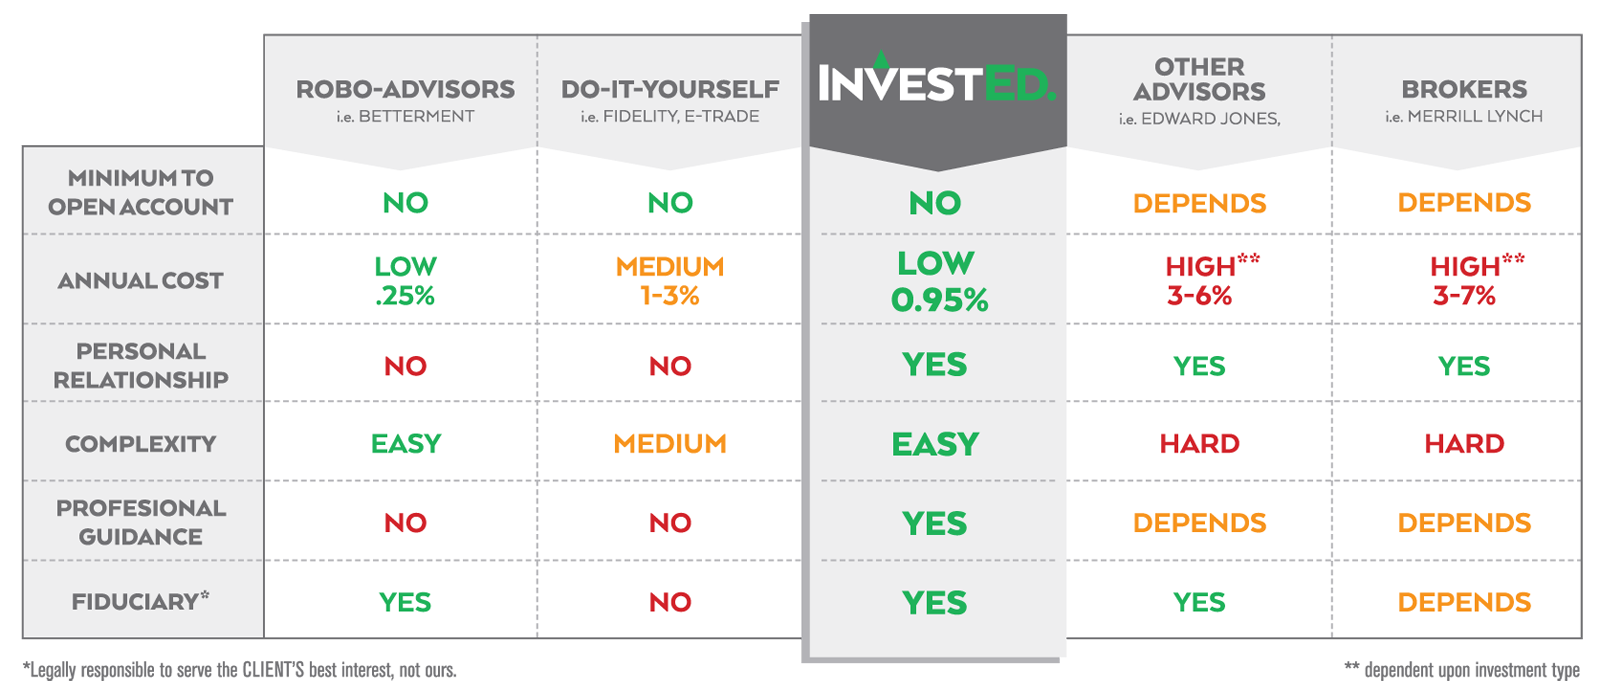 InvestEd Comparison Chart